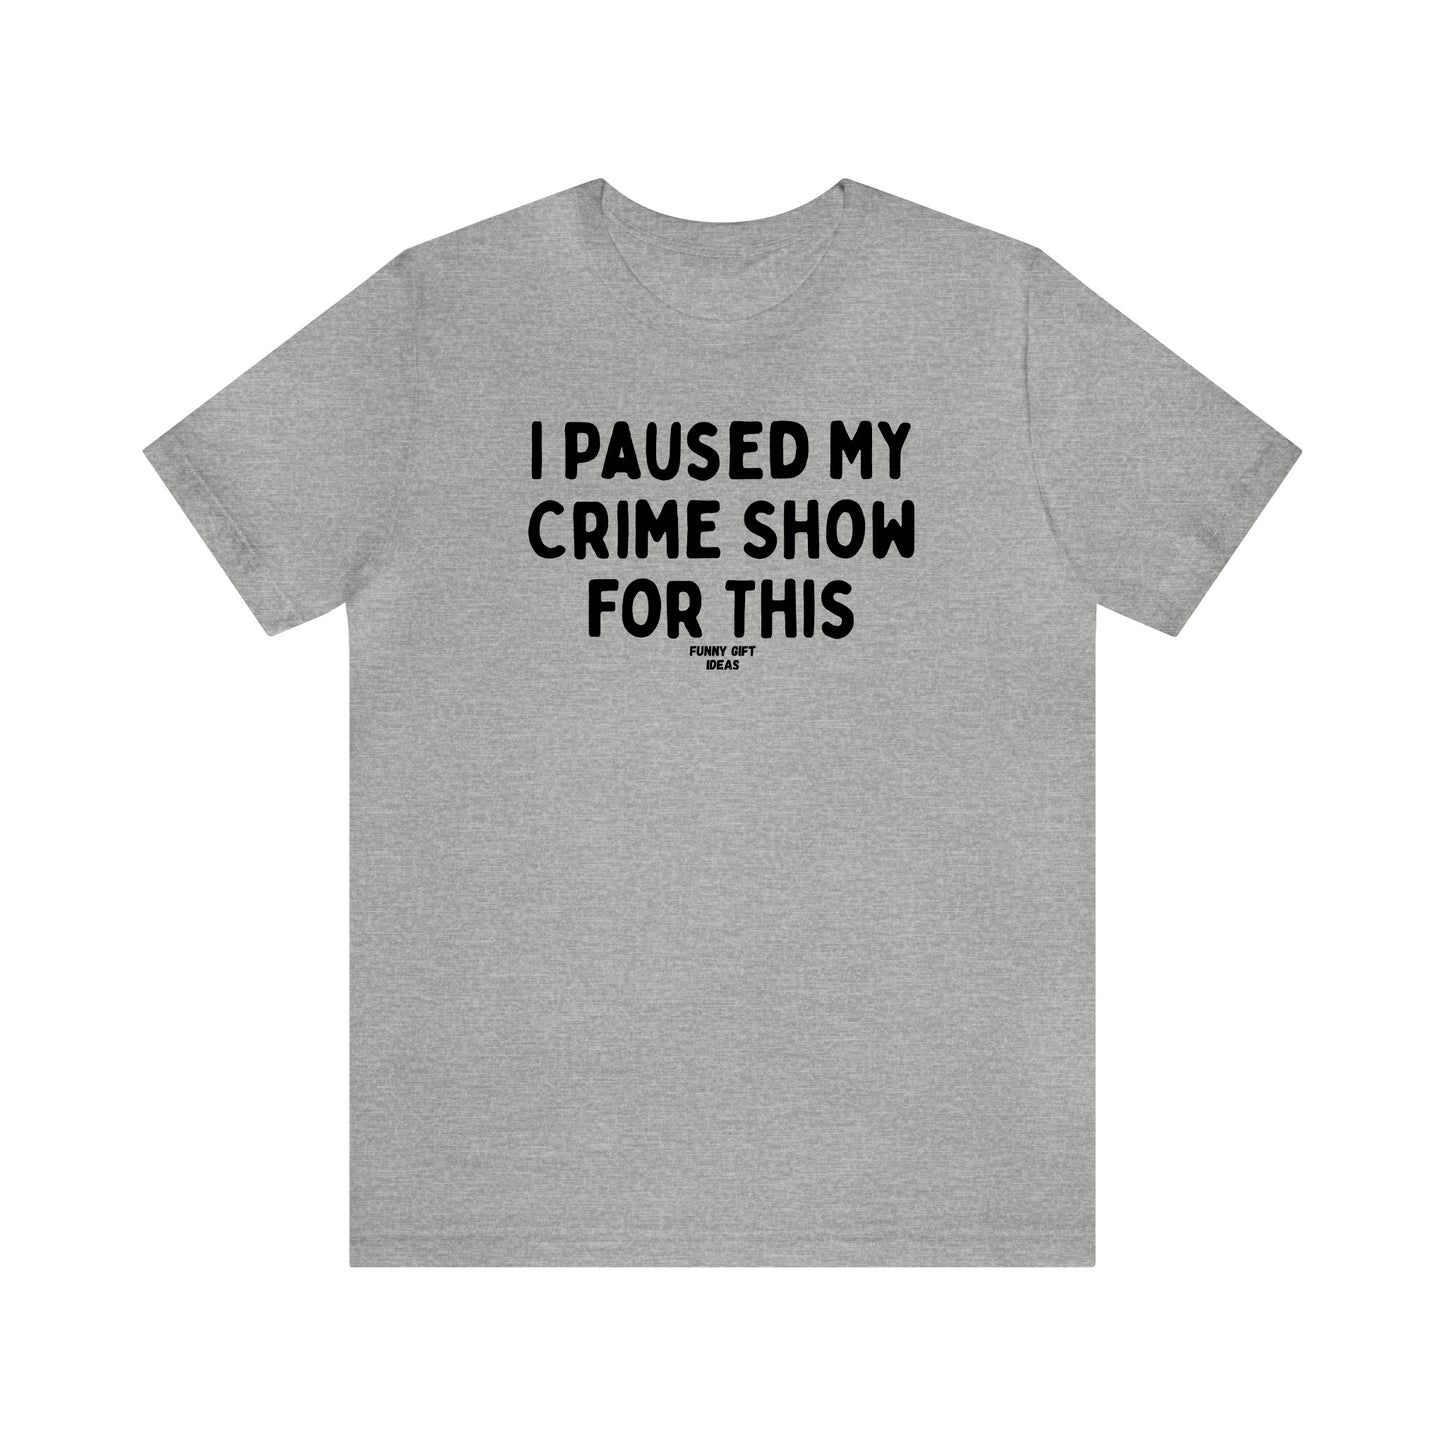 Funny Shirts for Women - I Paused My Crime Show for This - Women's T Shirts